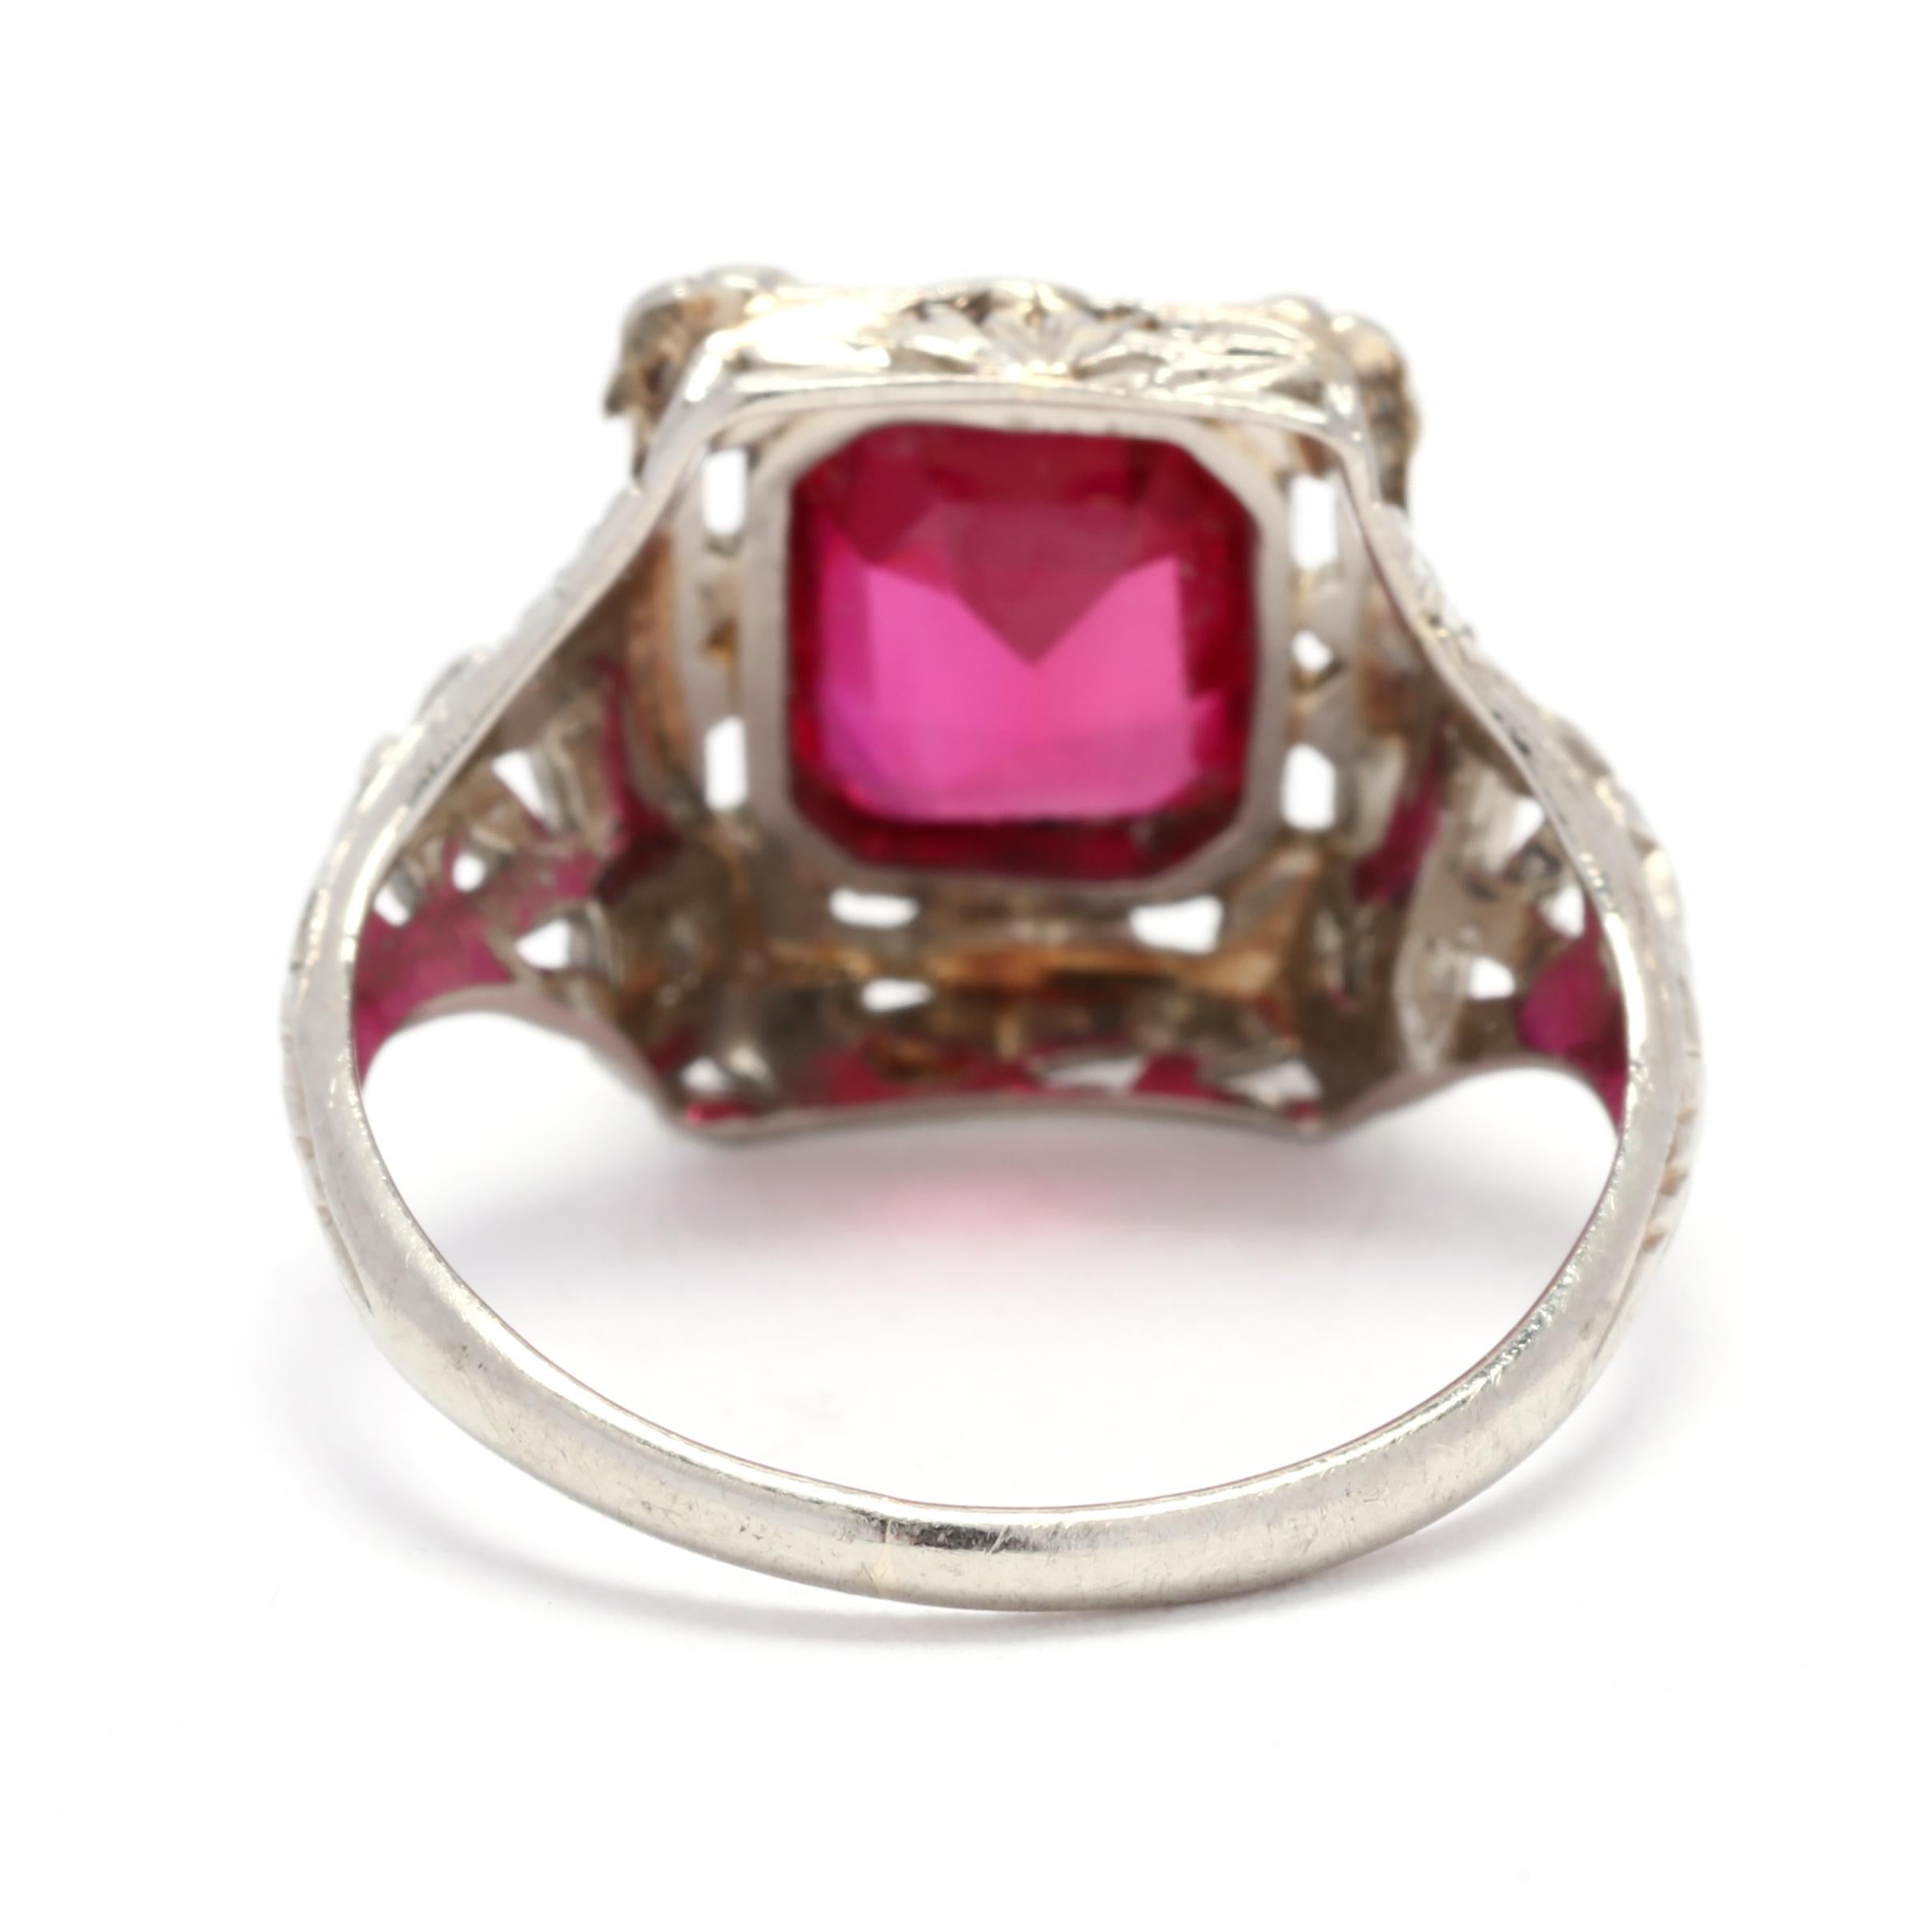 Synthetic Ruby Floral Filigree Statement Ring, 14K White Gold, Ring Size 4.5 In Good Condition For Sale In McLeansville, NC